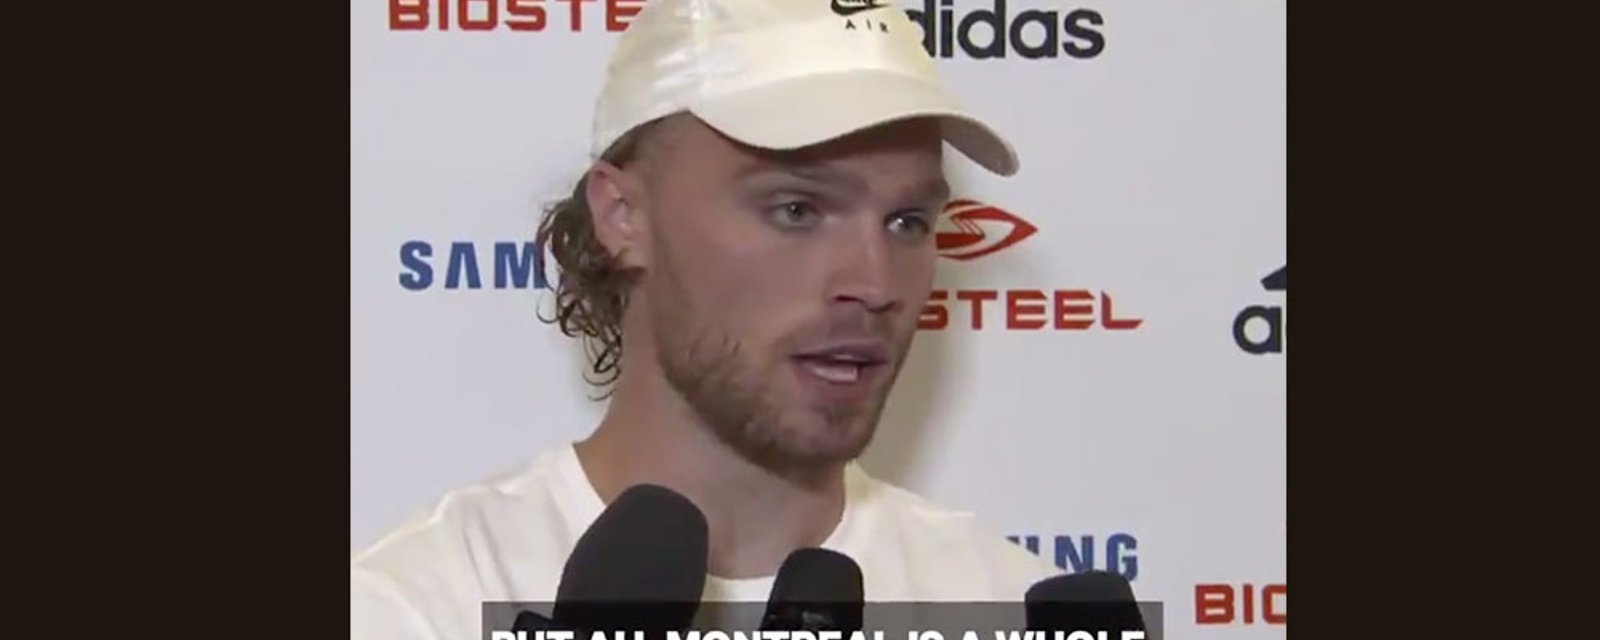 Toronto native Max Domi calls out Leafs fans